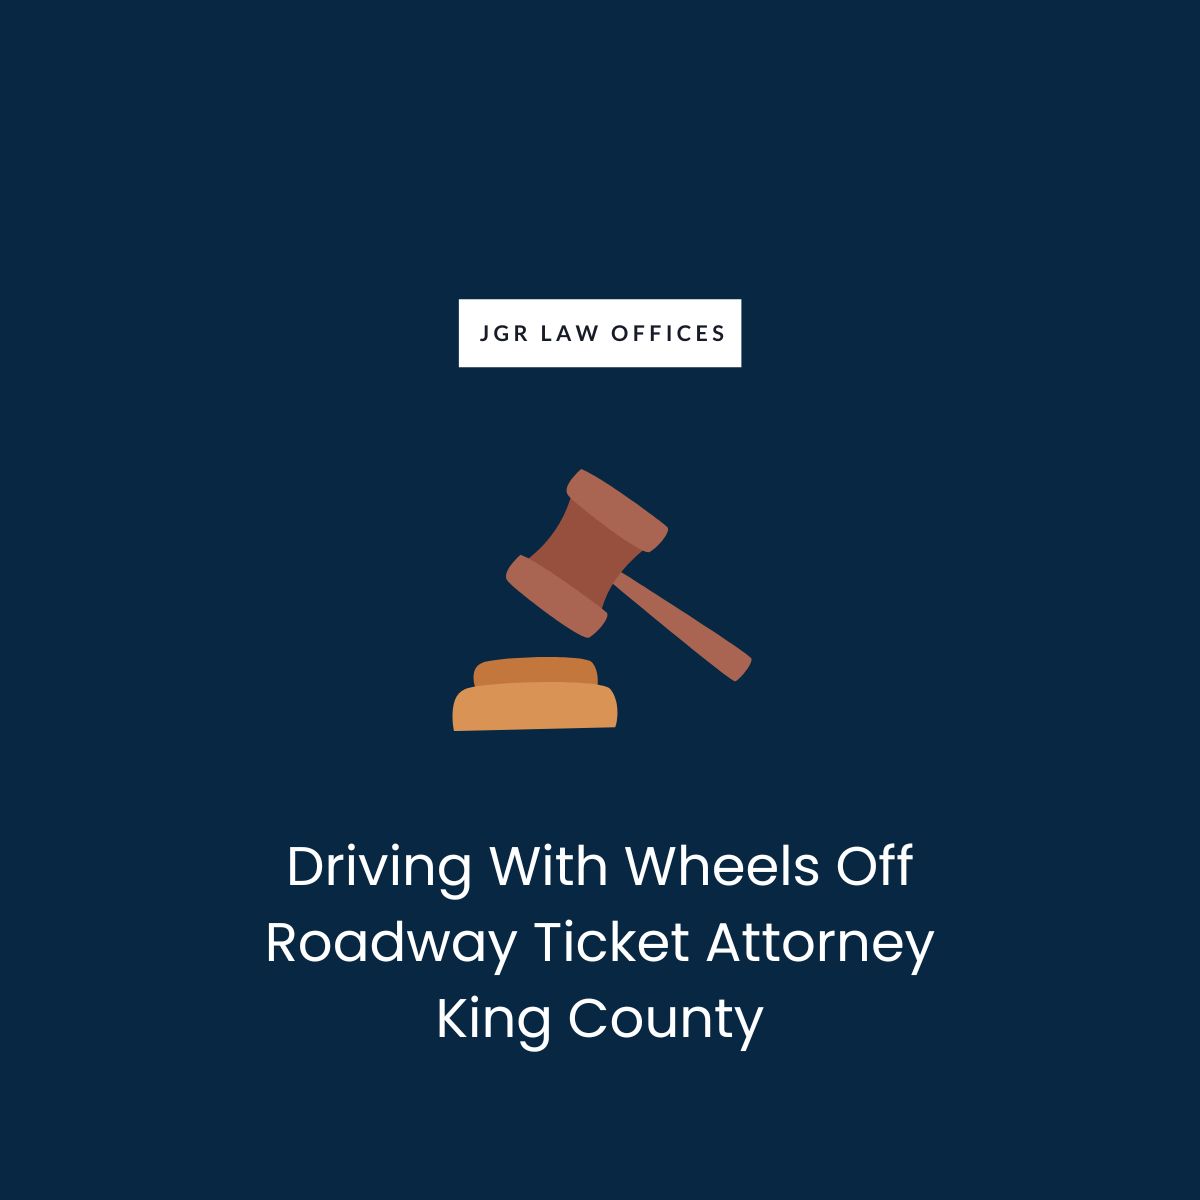 Driving With Wheels Off Roadway Ticket Attorney King County